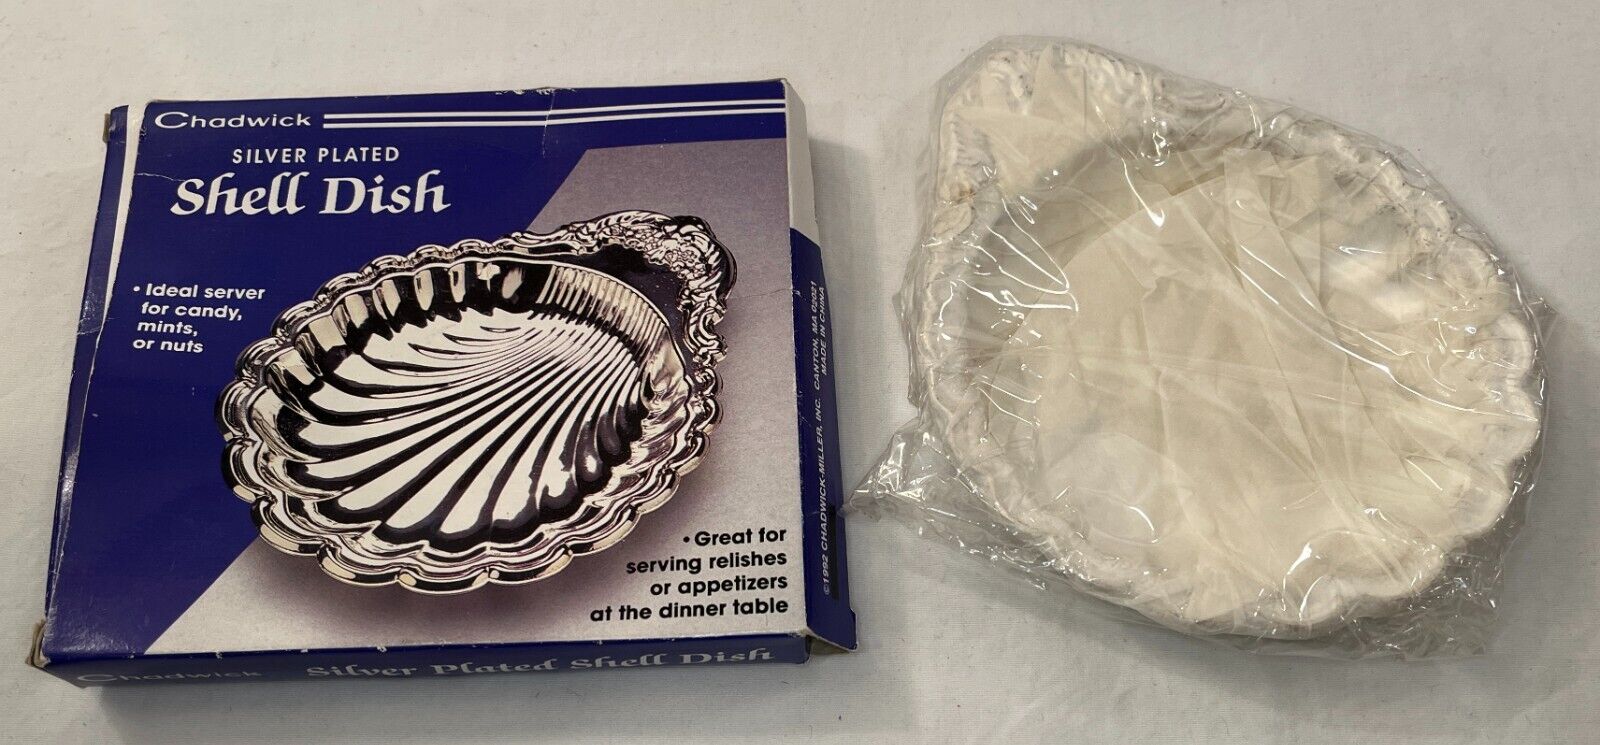 Chadwick Silver Plated Shell Dish (for Candy, Mints, Nuts, Appetizer), Open Box 